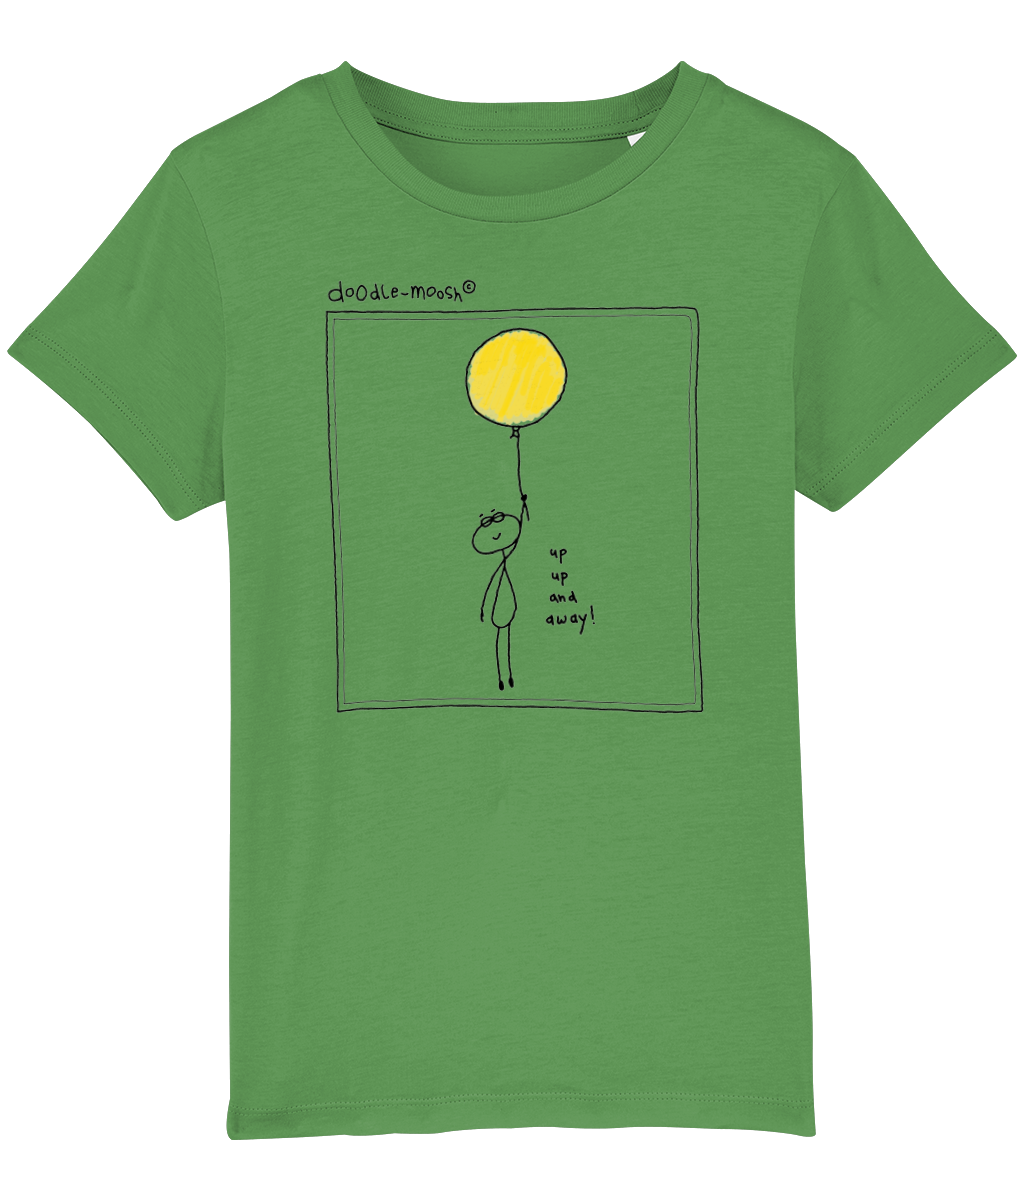 Up up and away t-shirt, green with black, colourful drawing